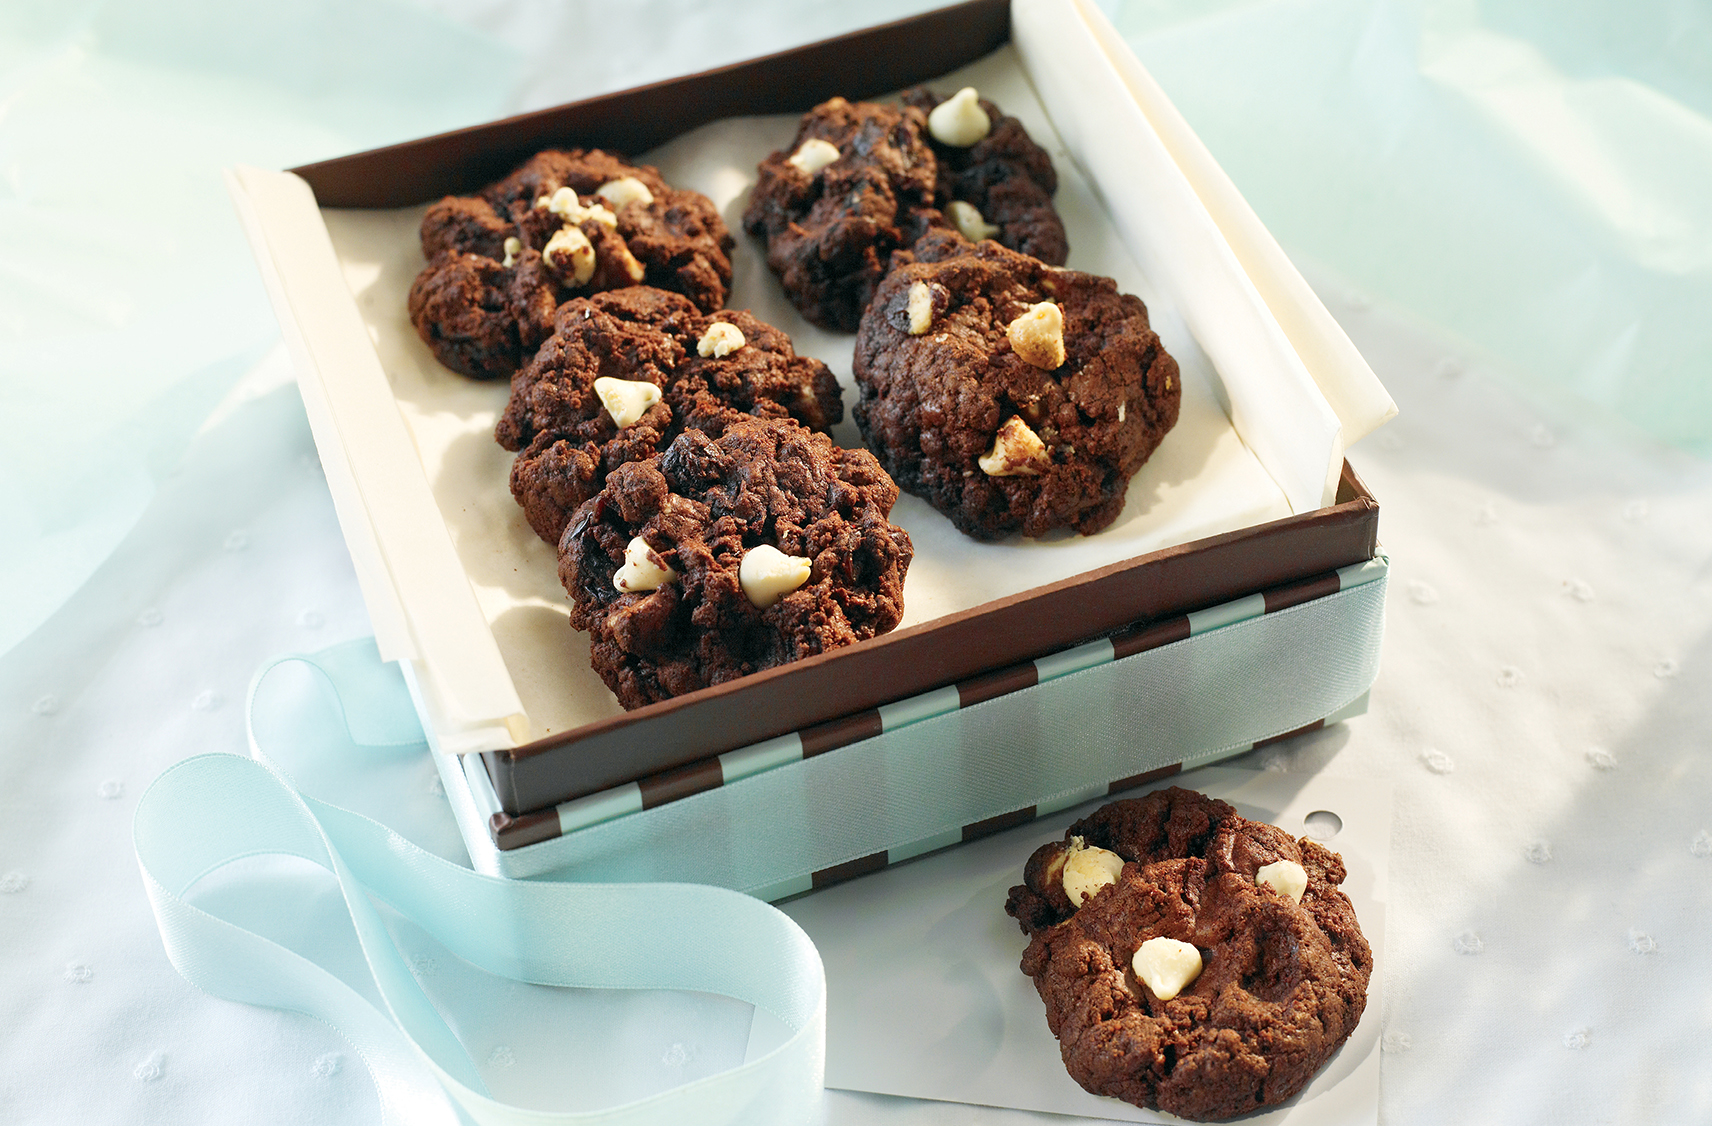 A box of Chocolate cherry brownie cookies with white chocolate chips